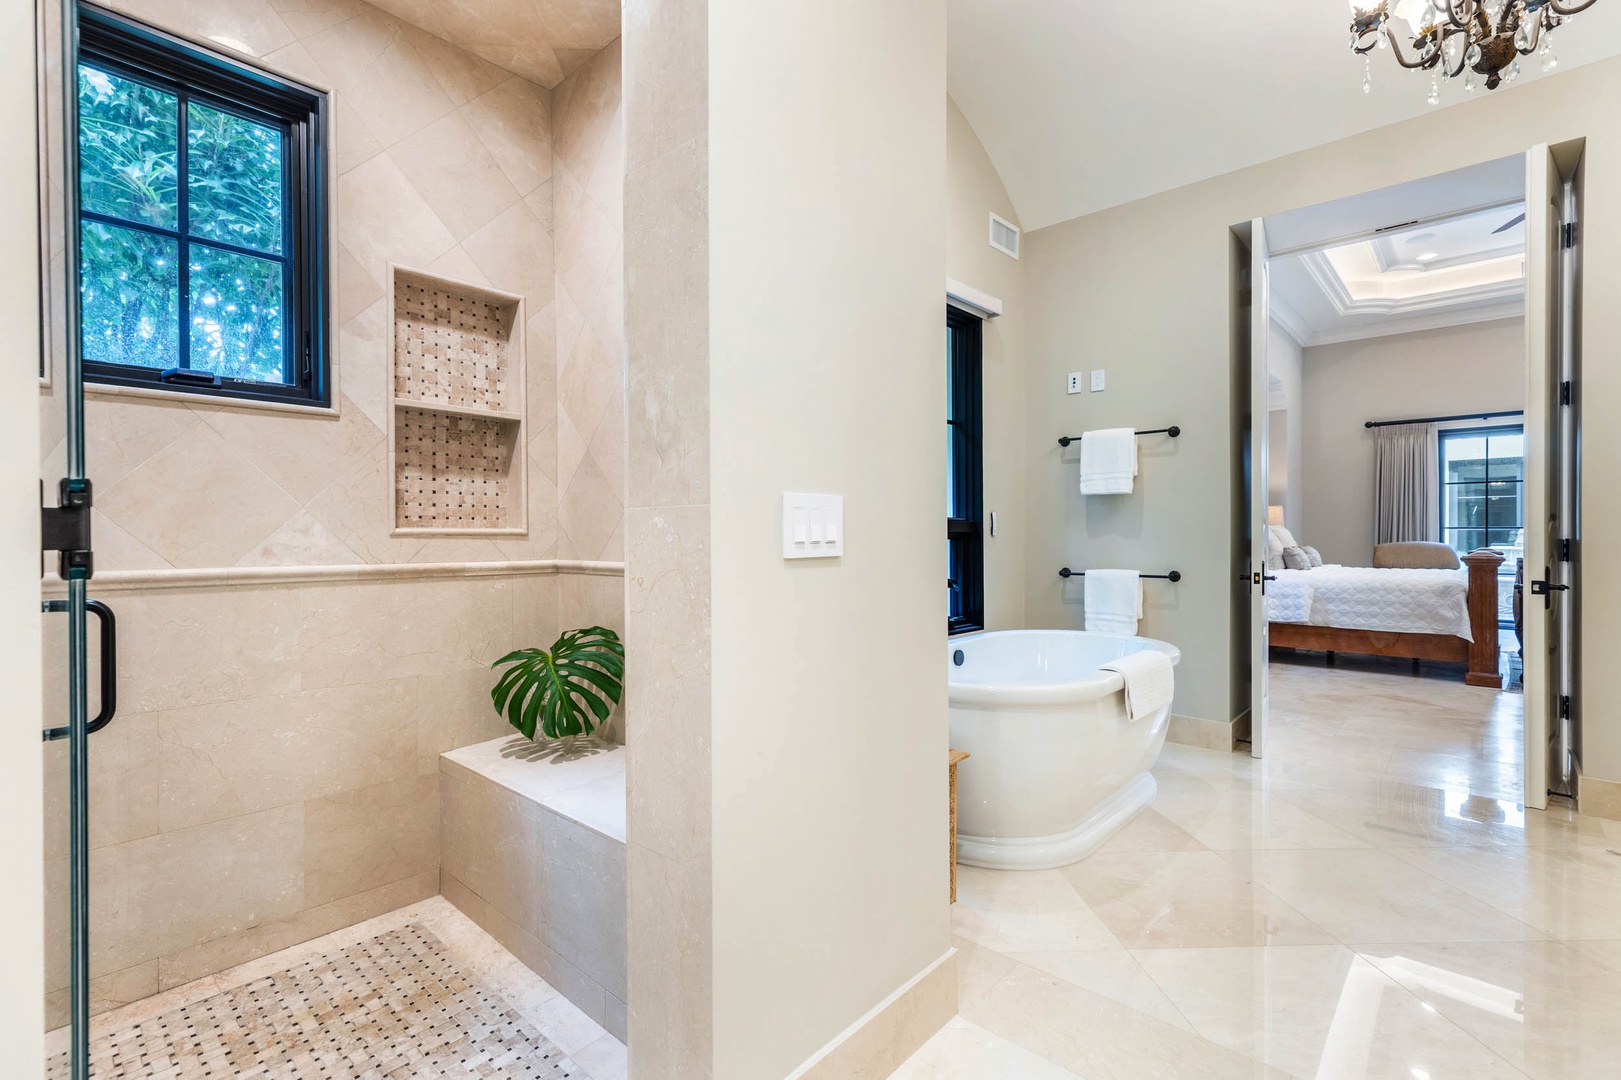 Honolulu Vacation Rentals, Royal Kahala Estate - Spa-like ensuite bathroom with a large soaking tub for unwinding at the end of the day.